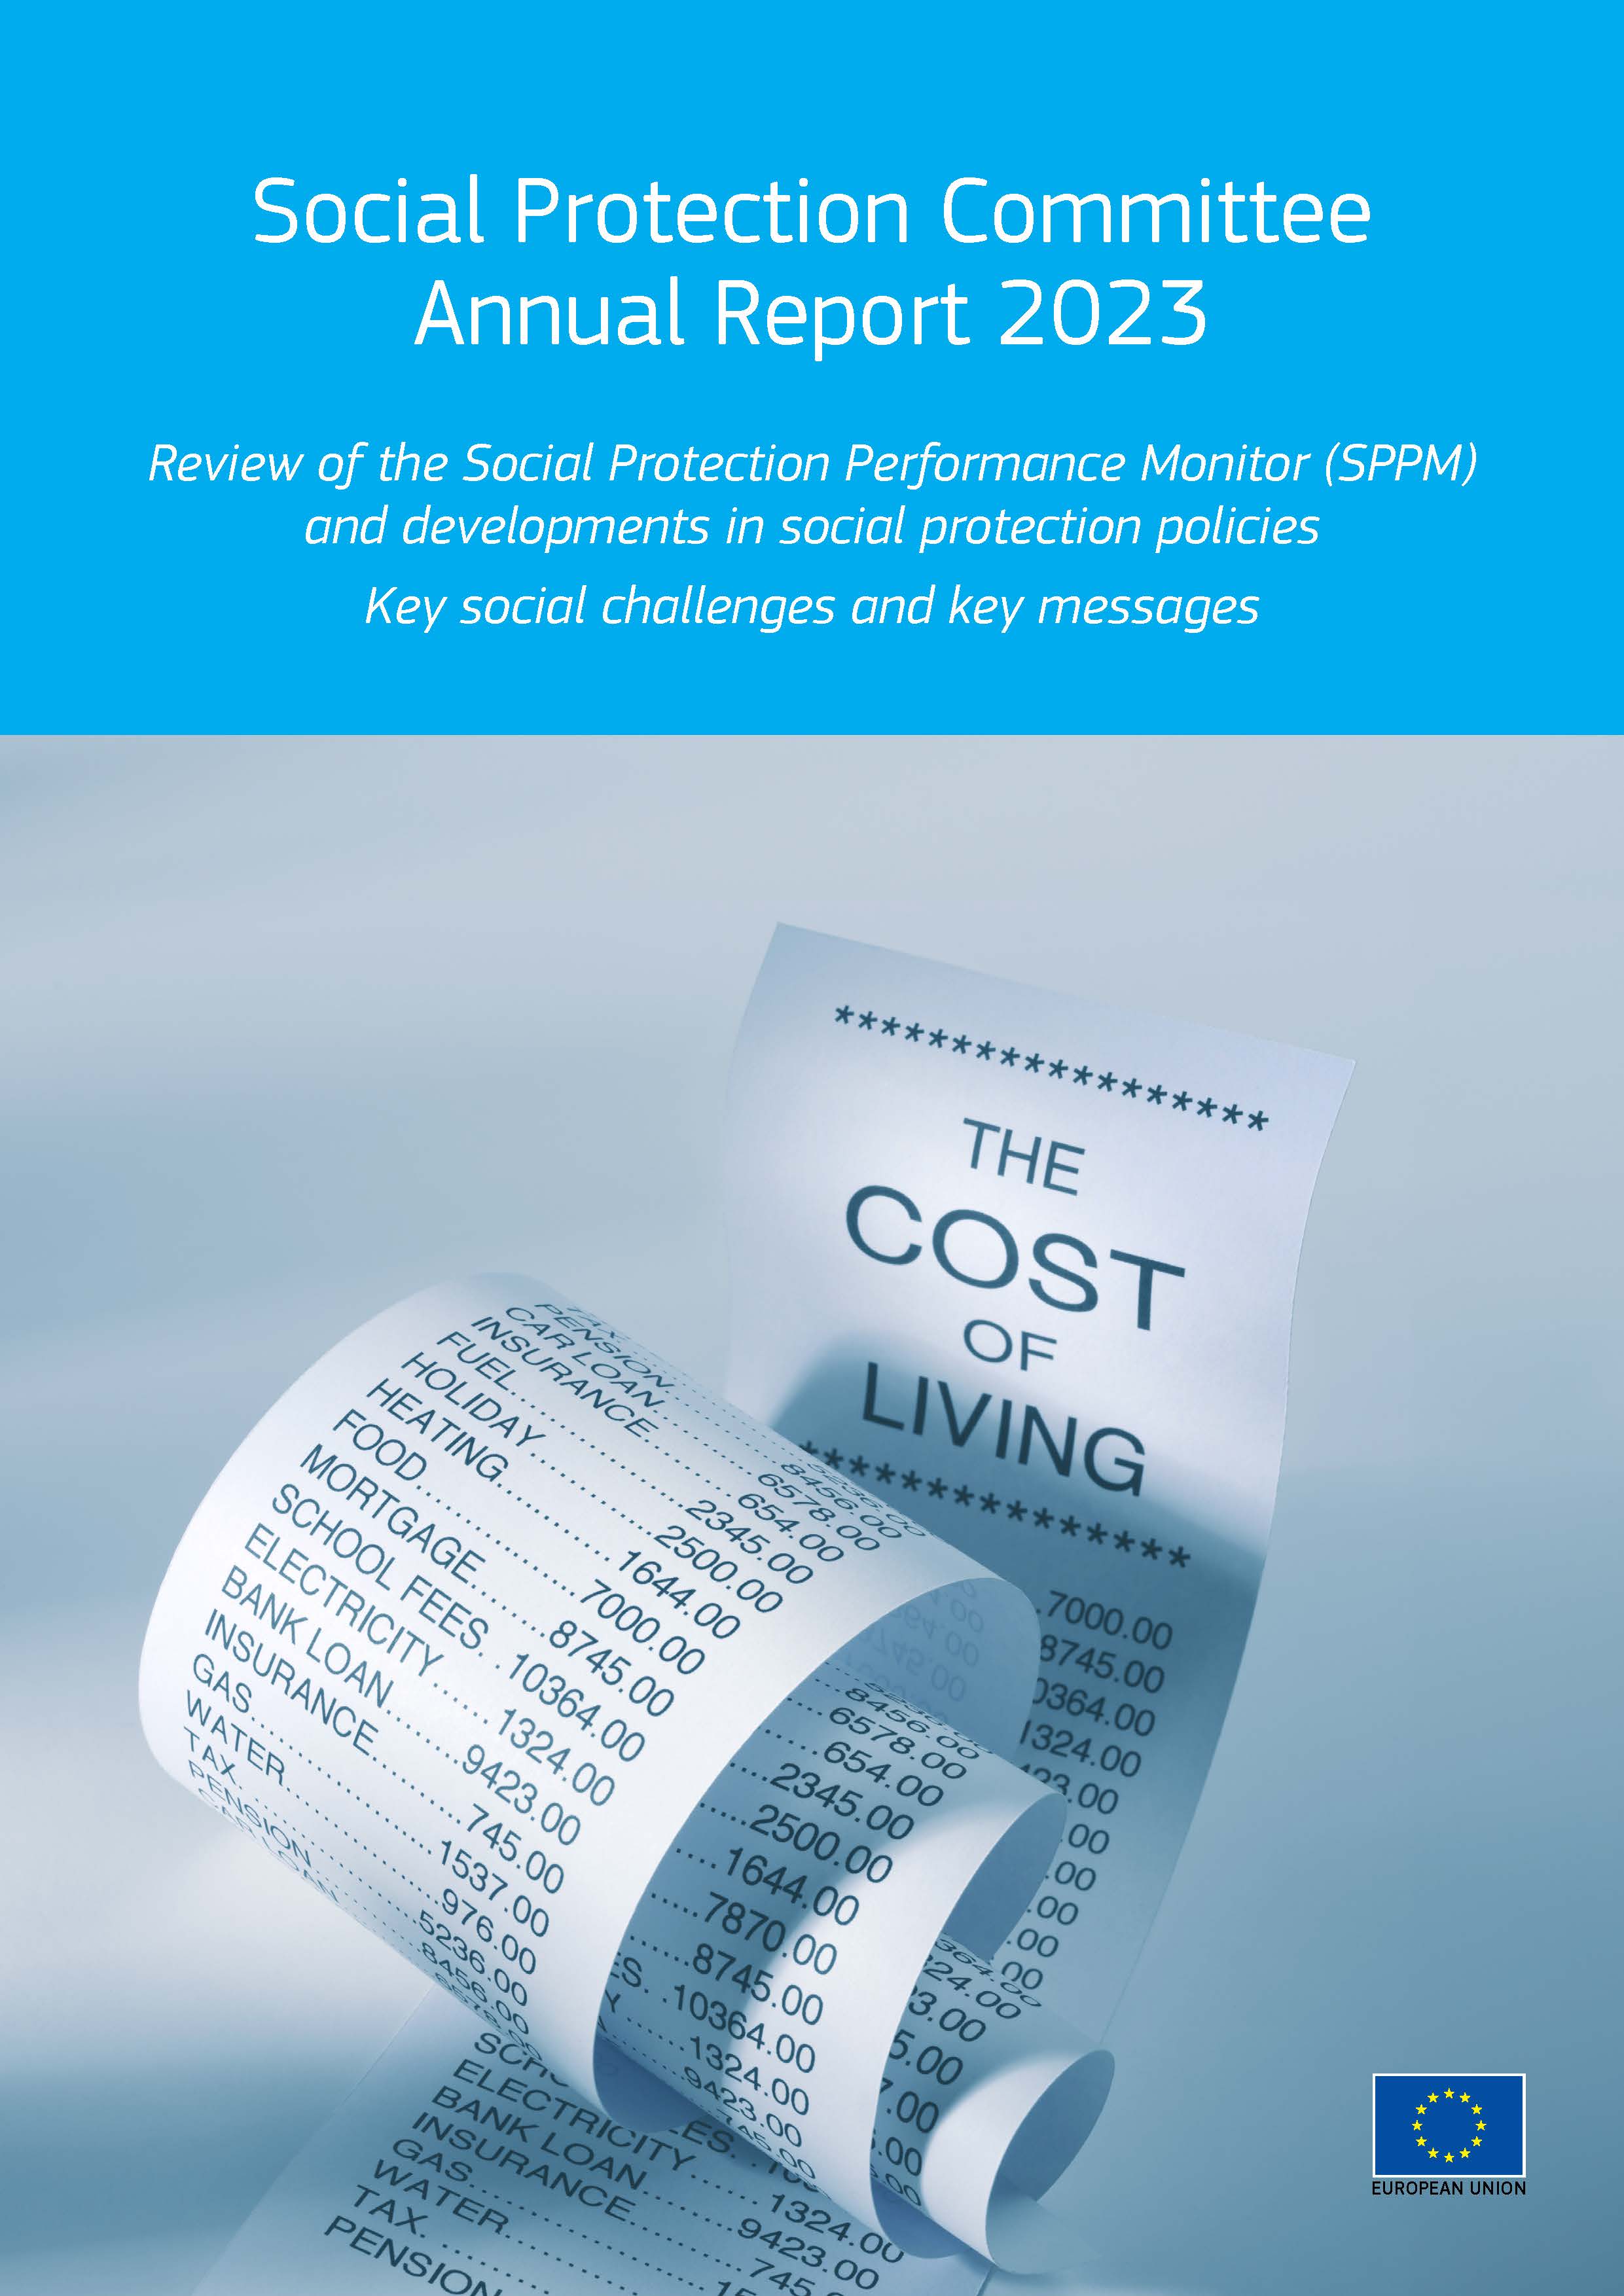 Social Protection Committee Annual Report 2023
